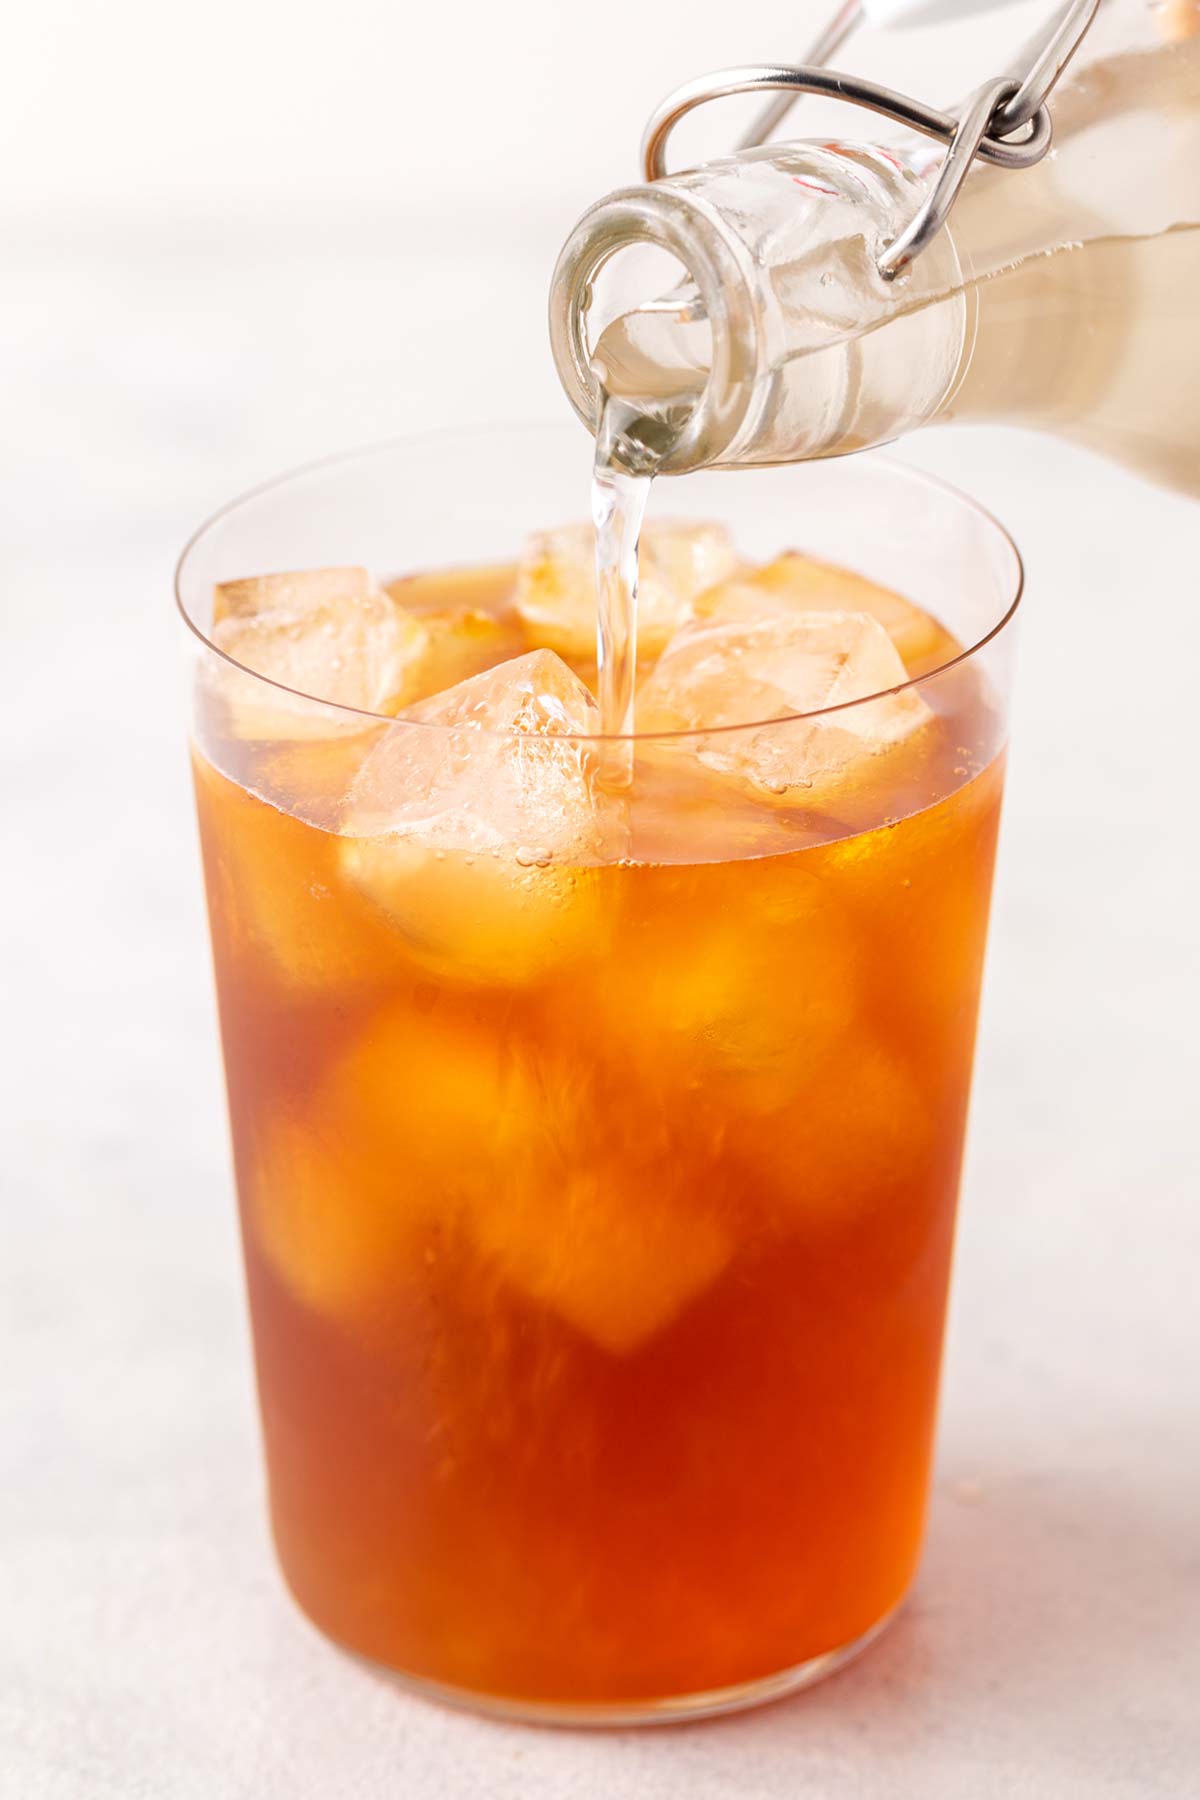 Simple Homemade Ginger Syrup poured into iced tea in clear glass.